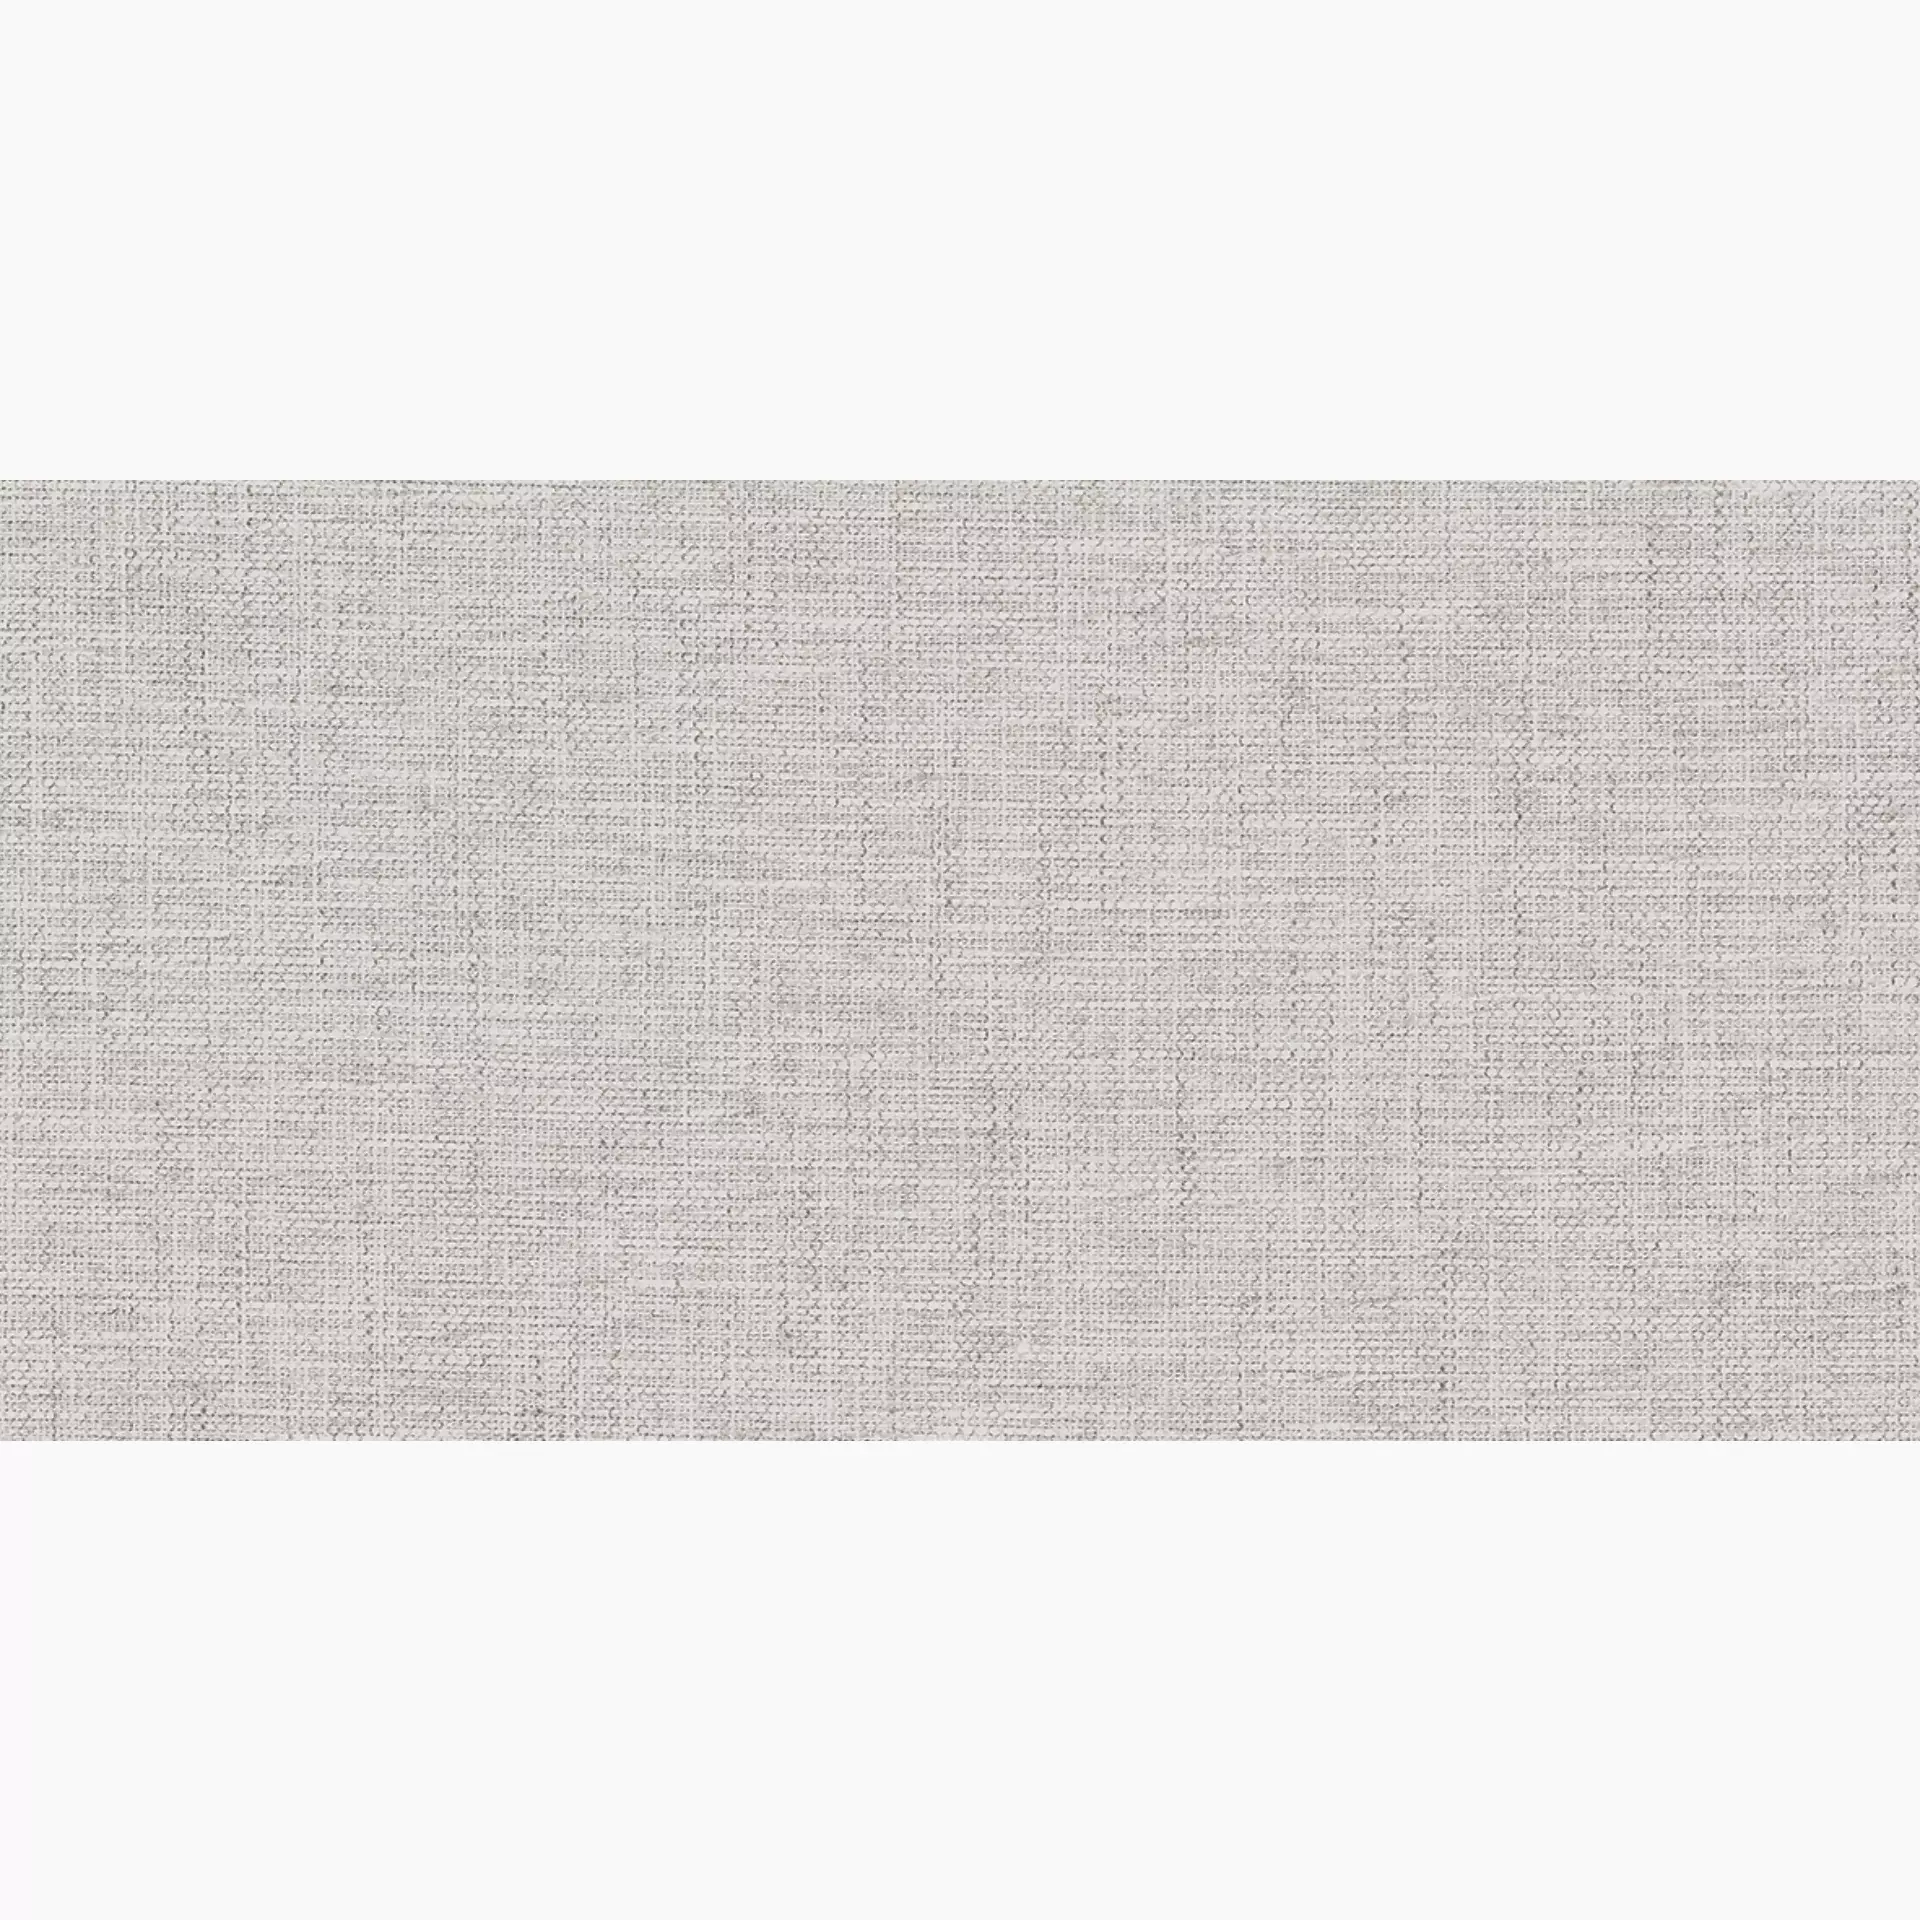 Sant Agostino Fineart White Natural CSAFIWH130 30x60cm rectified 10mm